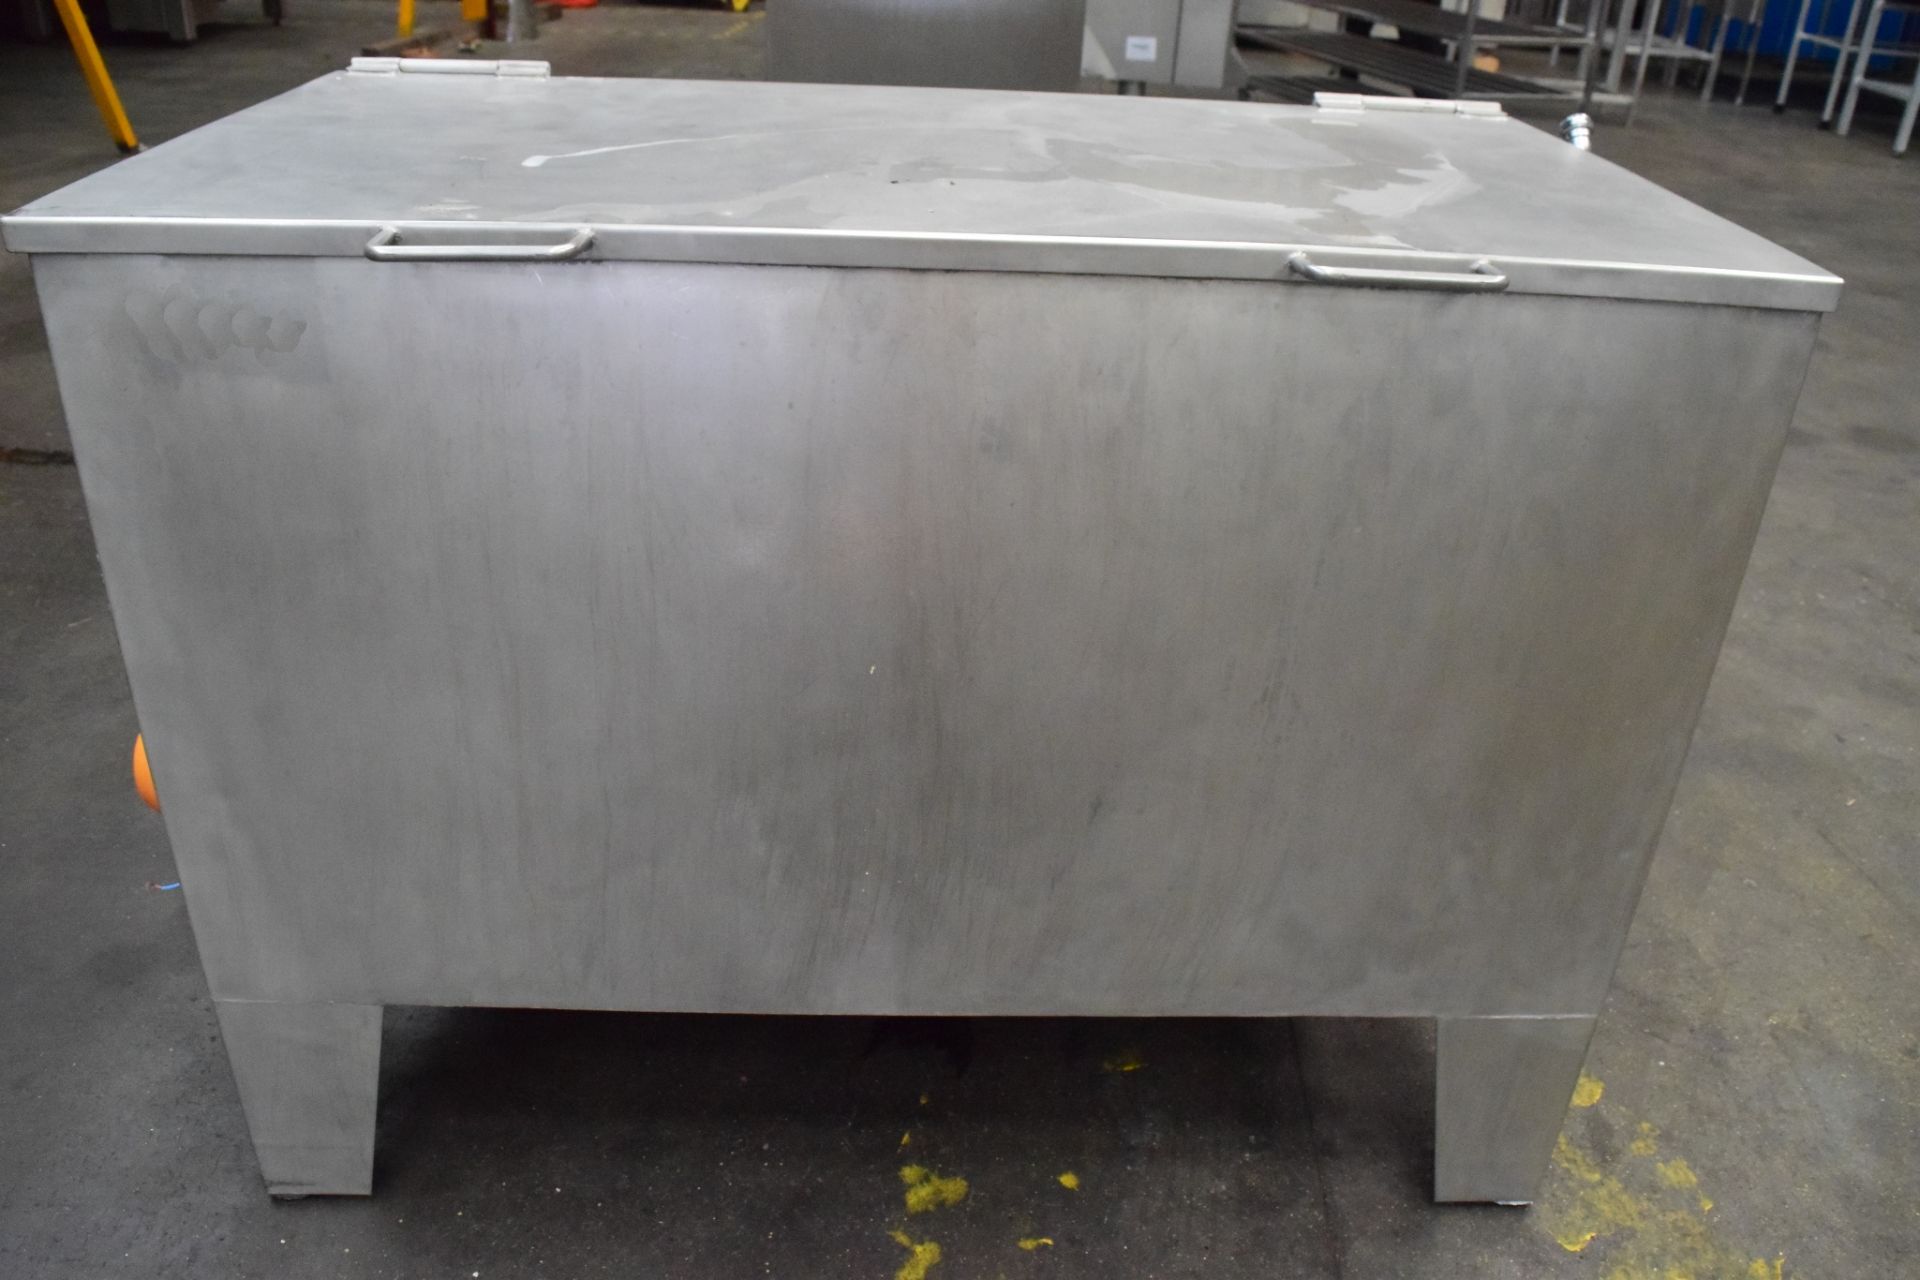 stainless steel electric, insulated tank sterylizer. Overall dimensions: 1200 x 700 x 980 H Lift out